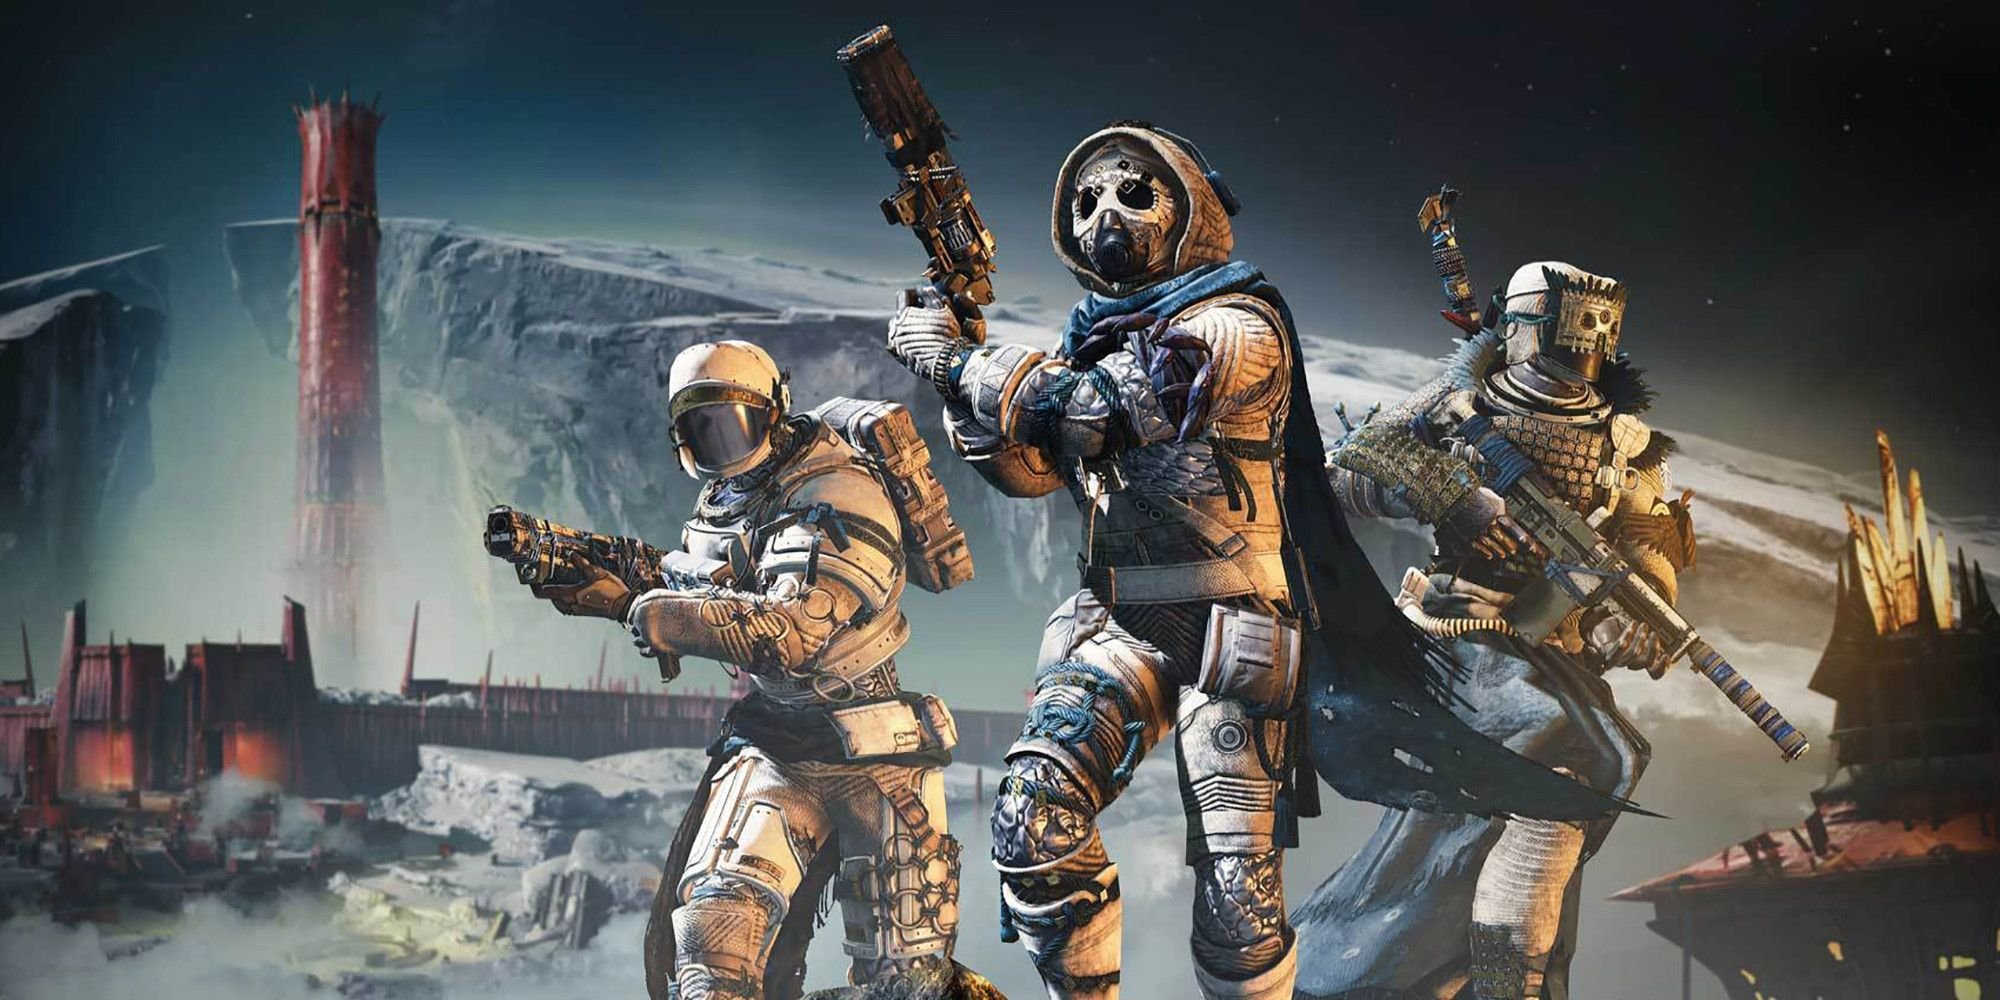 Bungie Says It Has "Zero-Tolerance" For Workplace Abuse After Activision Blizzard Allegations